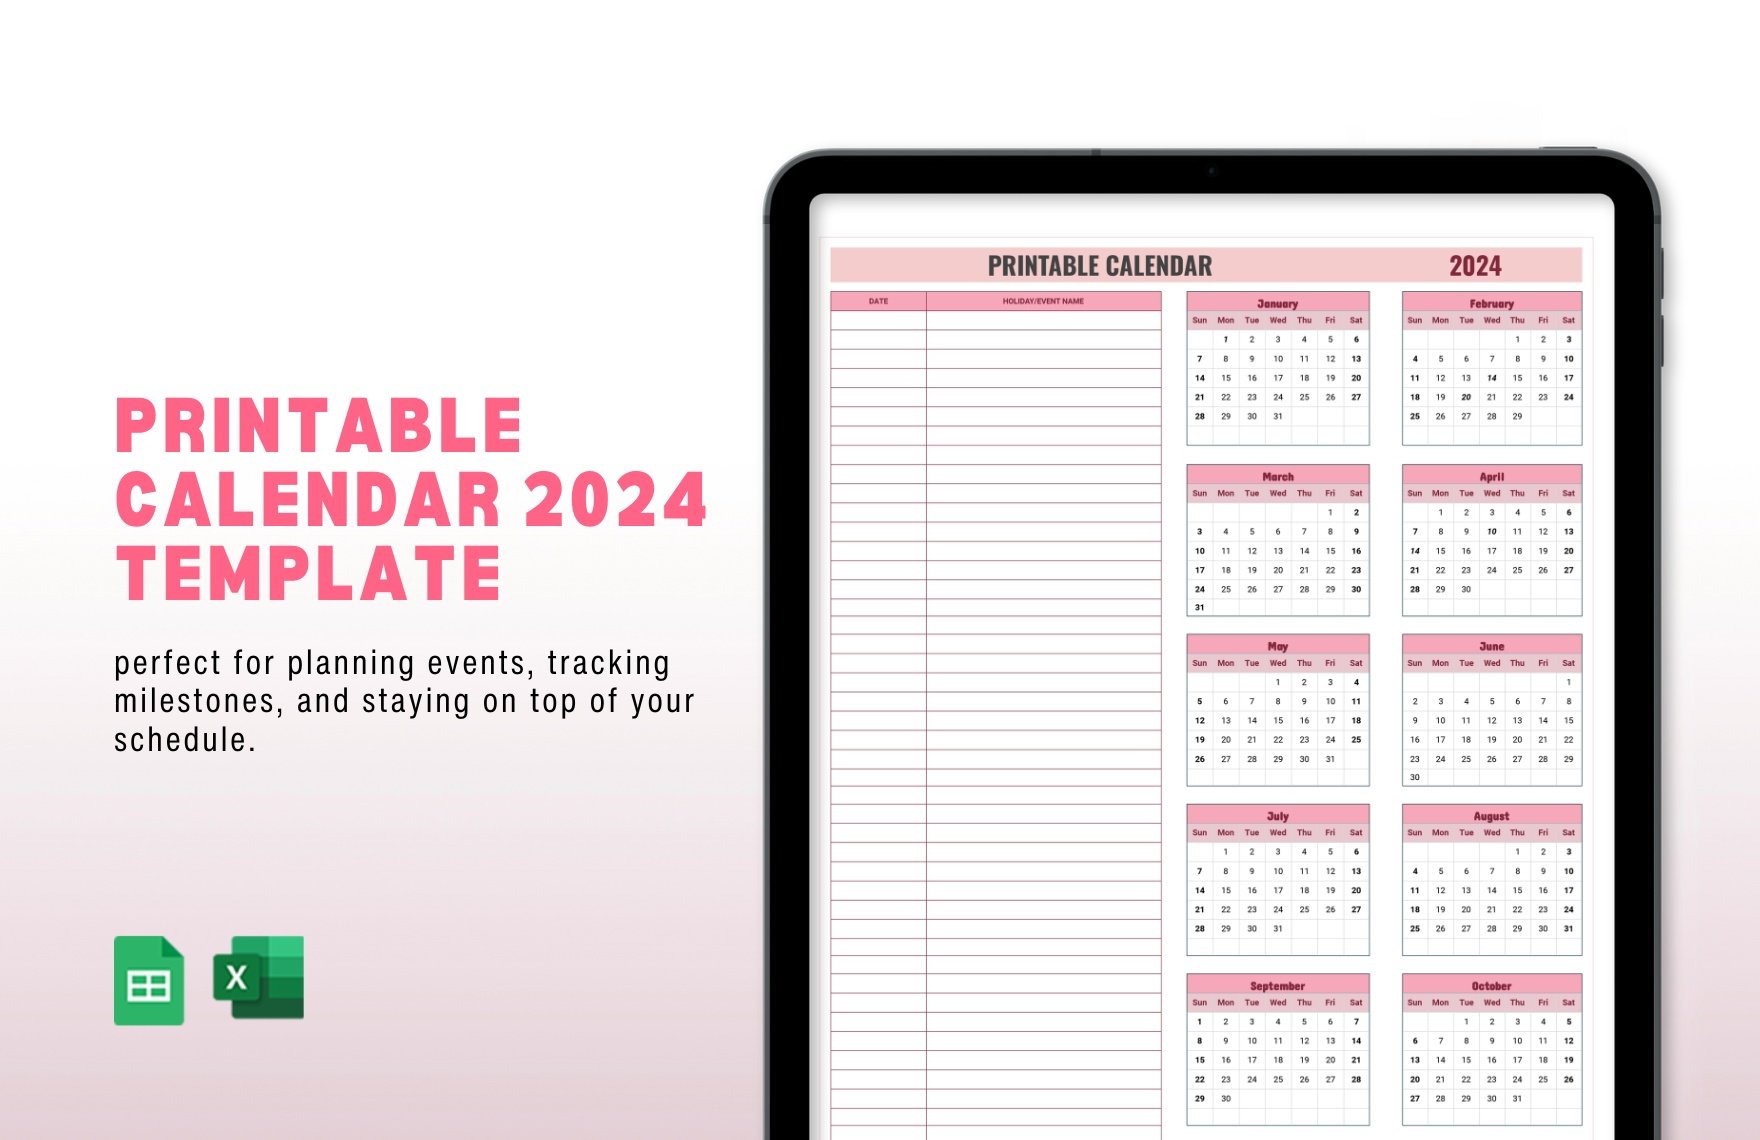 Free Printable Calendar 2024 Template in Excel, Google Sheets